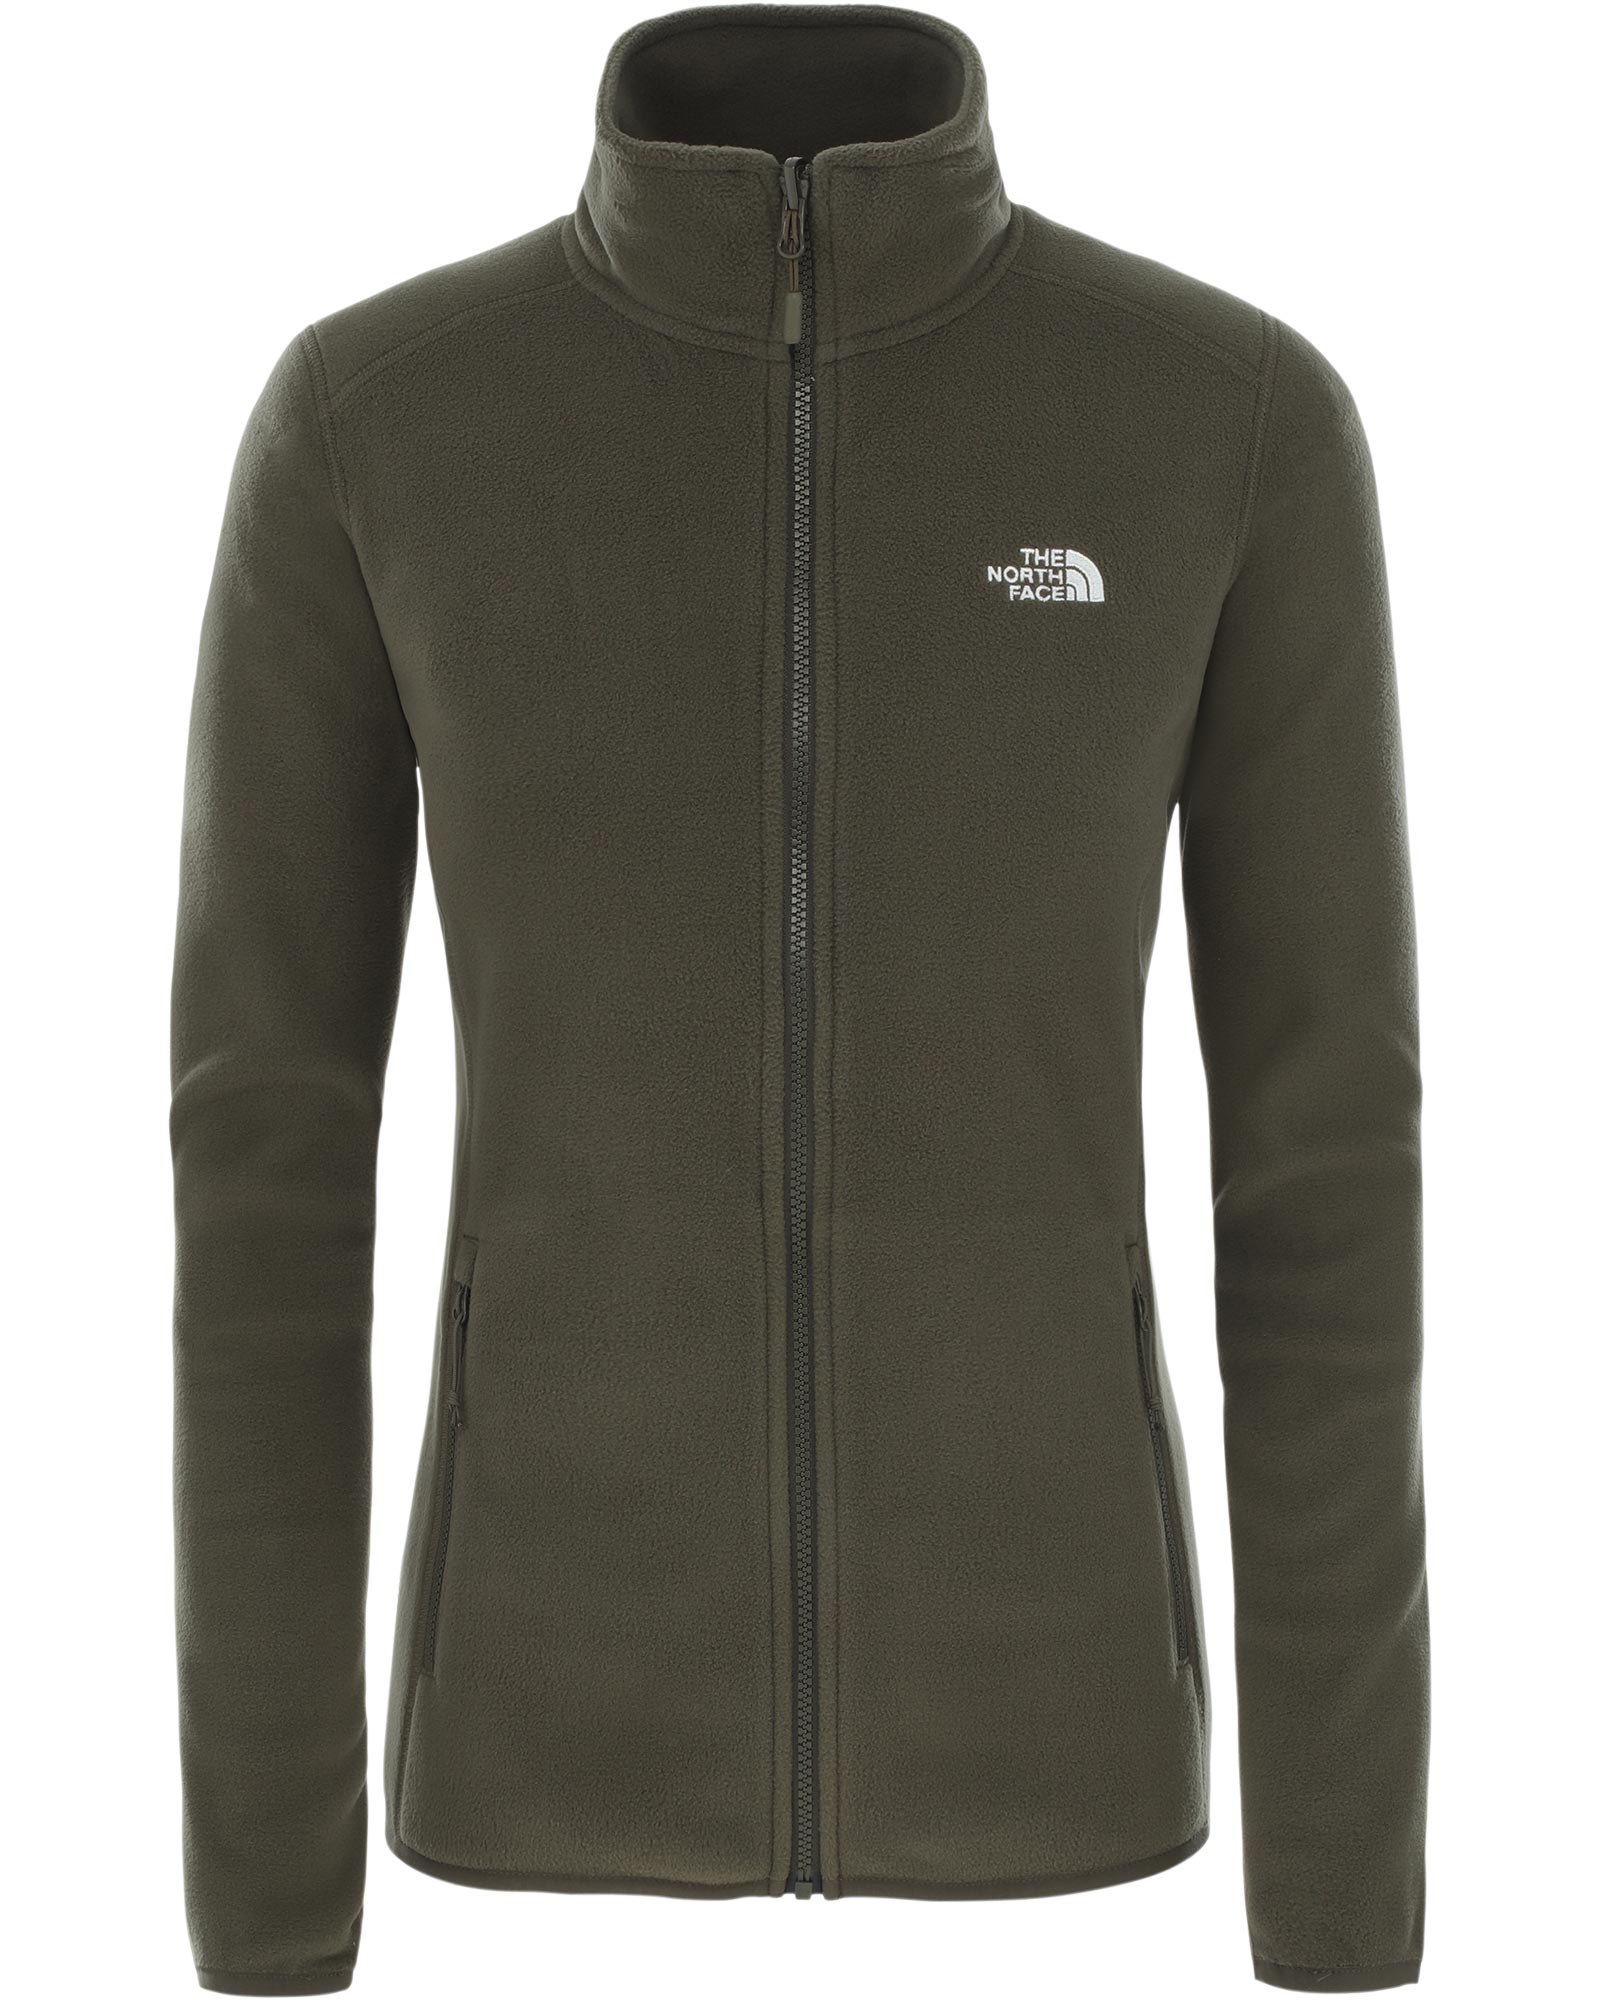 The North Face 100 Glacier Women’s Full Zip Jacket - New Taupe Green XS